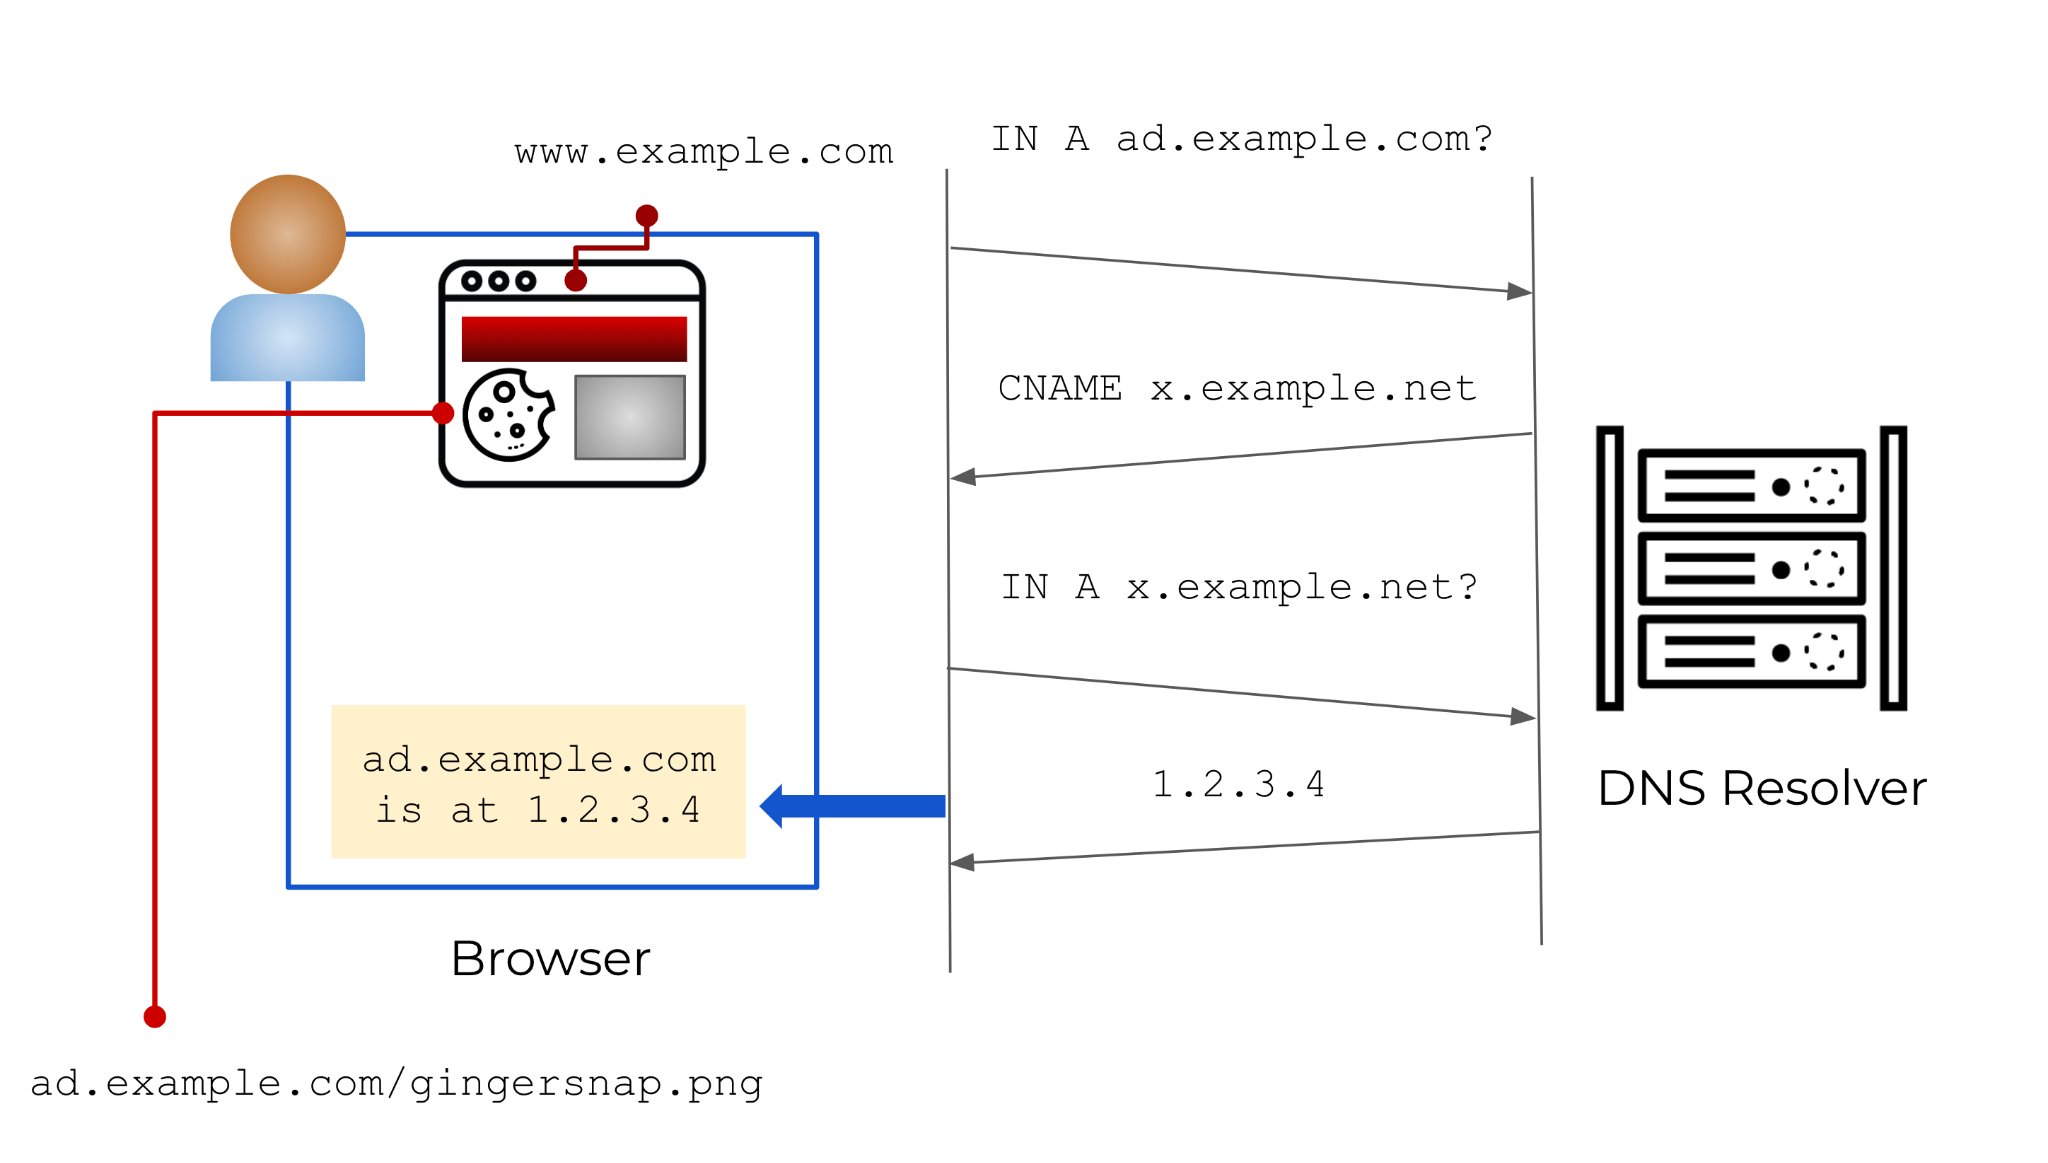 The user pictured browses to www[.]example[.]com. An ad embedded on the site is located at x[.]example[.]net, but because the website owner created a CNAME record that resolves to the IP address 1.2.3[.]4, this tracking activity is disguised.